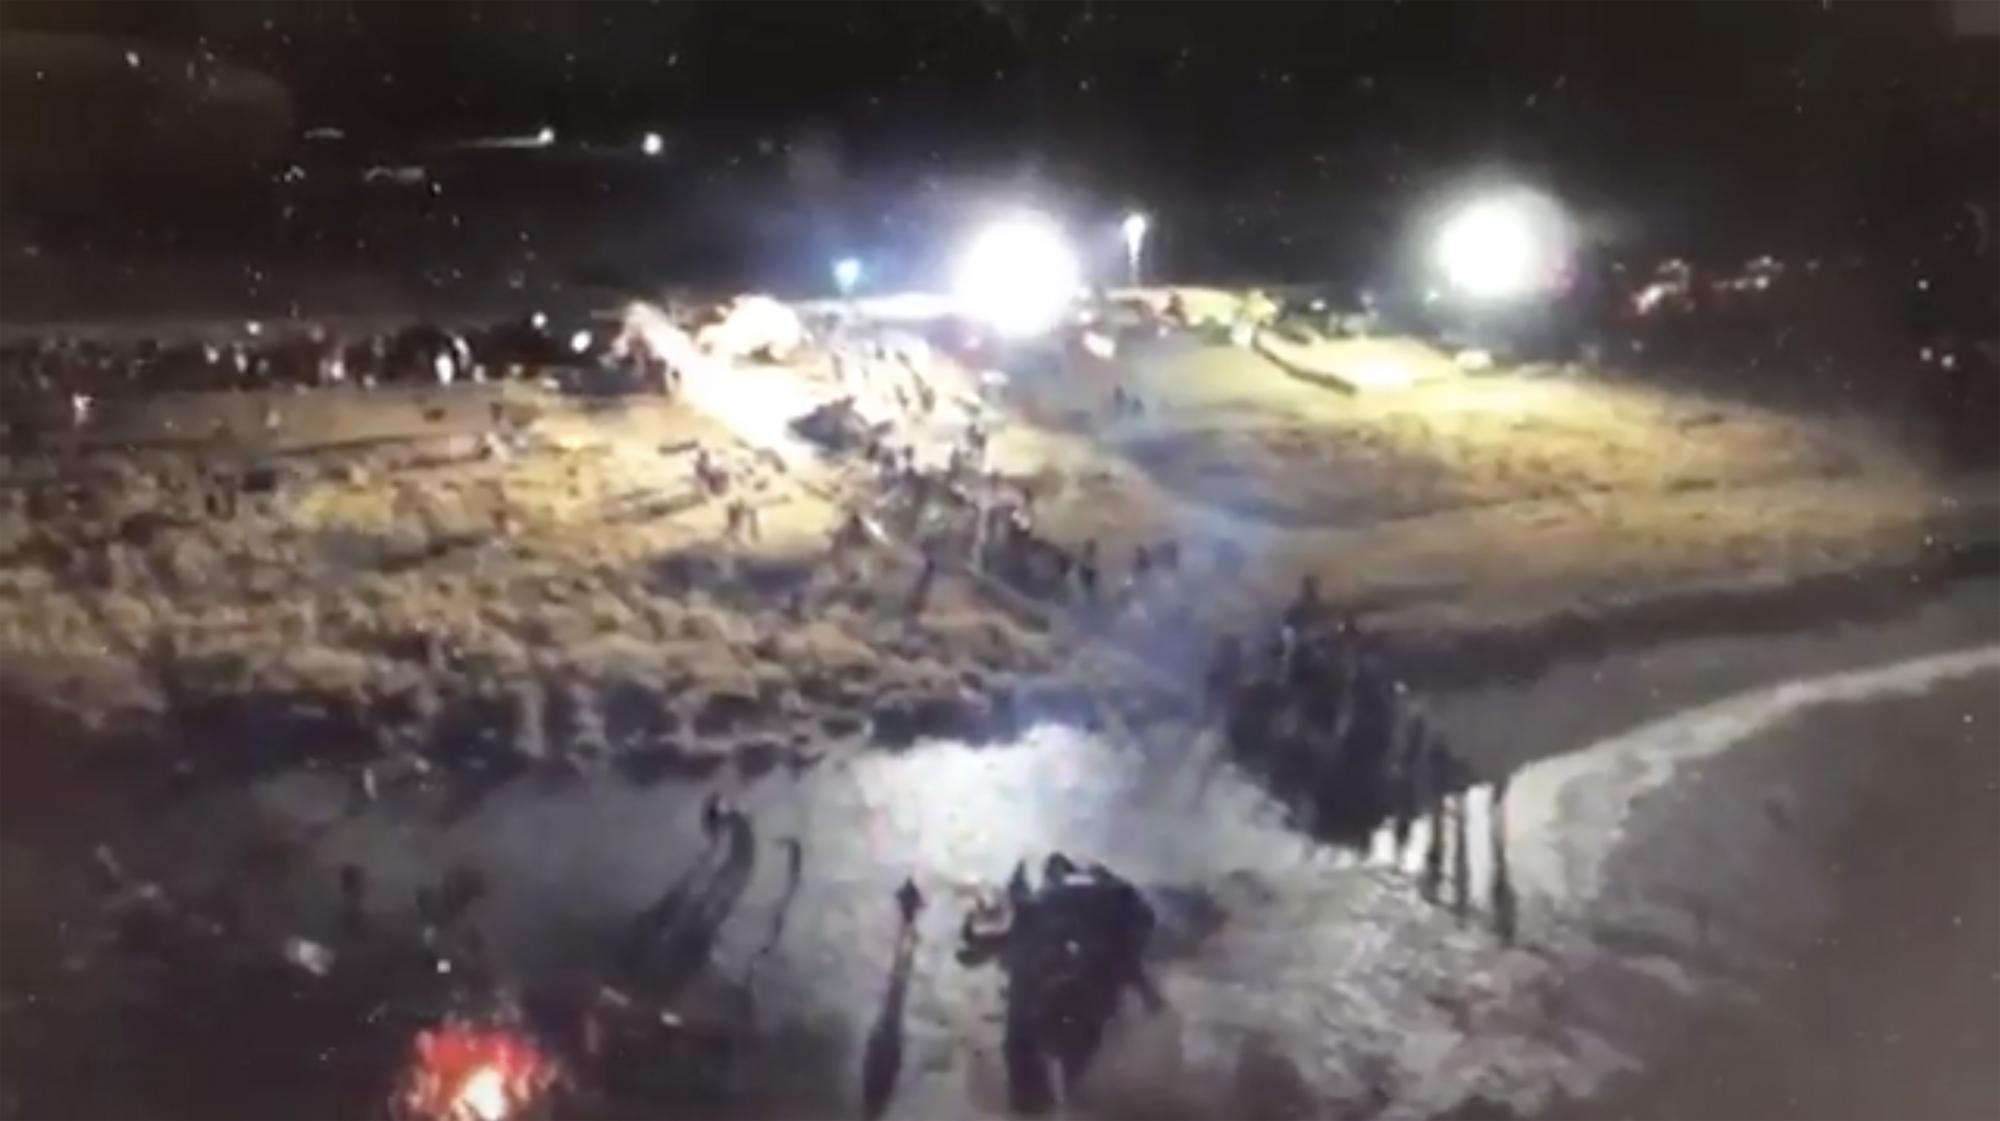 Digital Smoke Signals: Aerial Footage from the Night of November 20, 2016 at Standing Rock